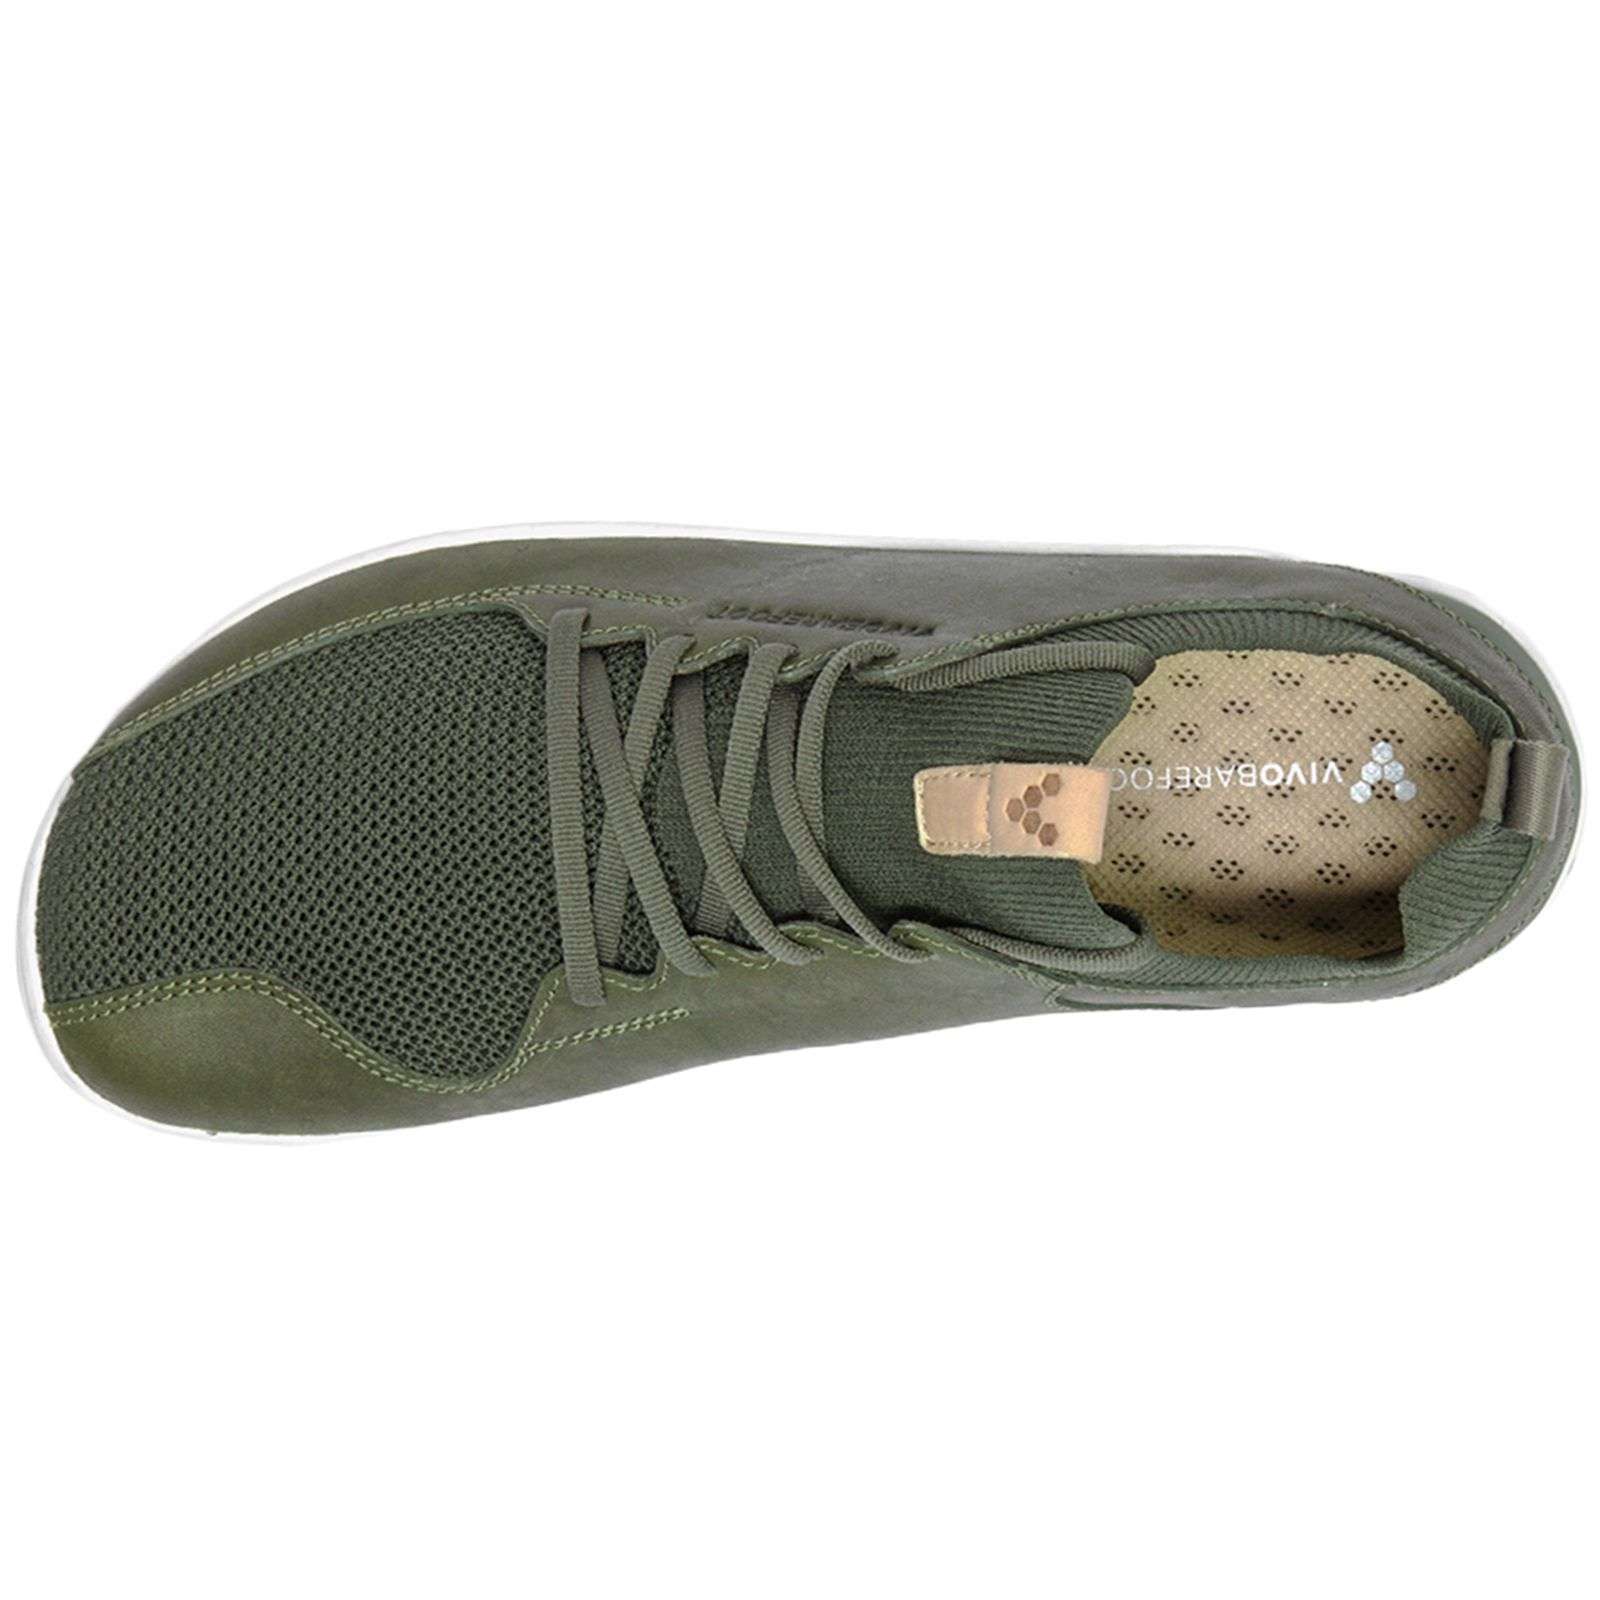 Vivobarefoot Primus Knit Leather Textile Womens Trainers#color_olive green